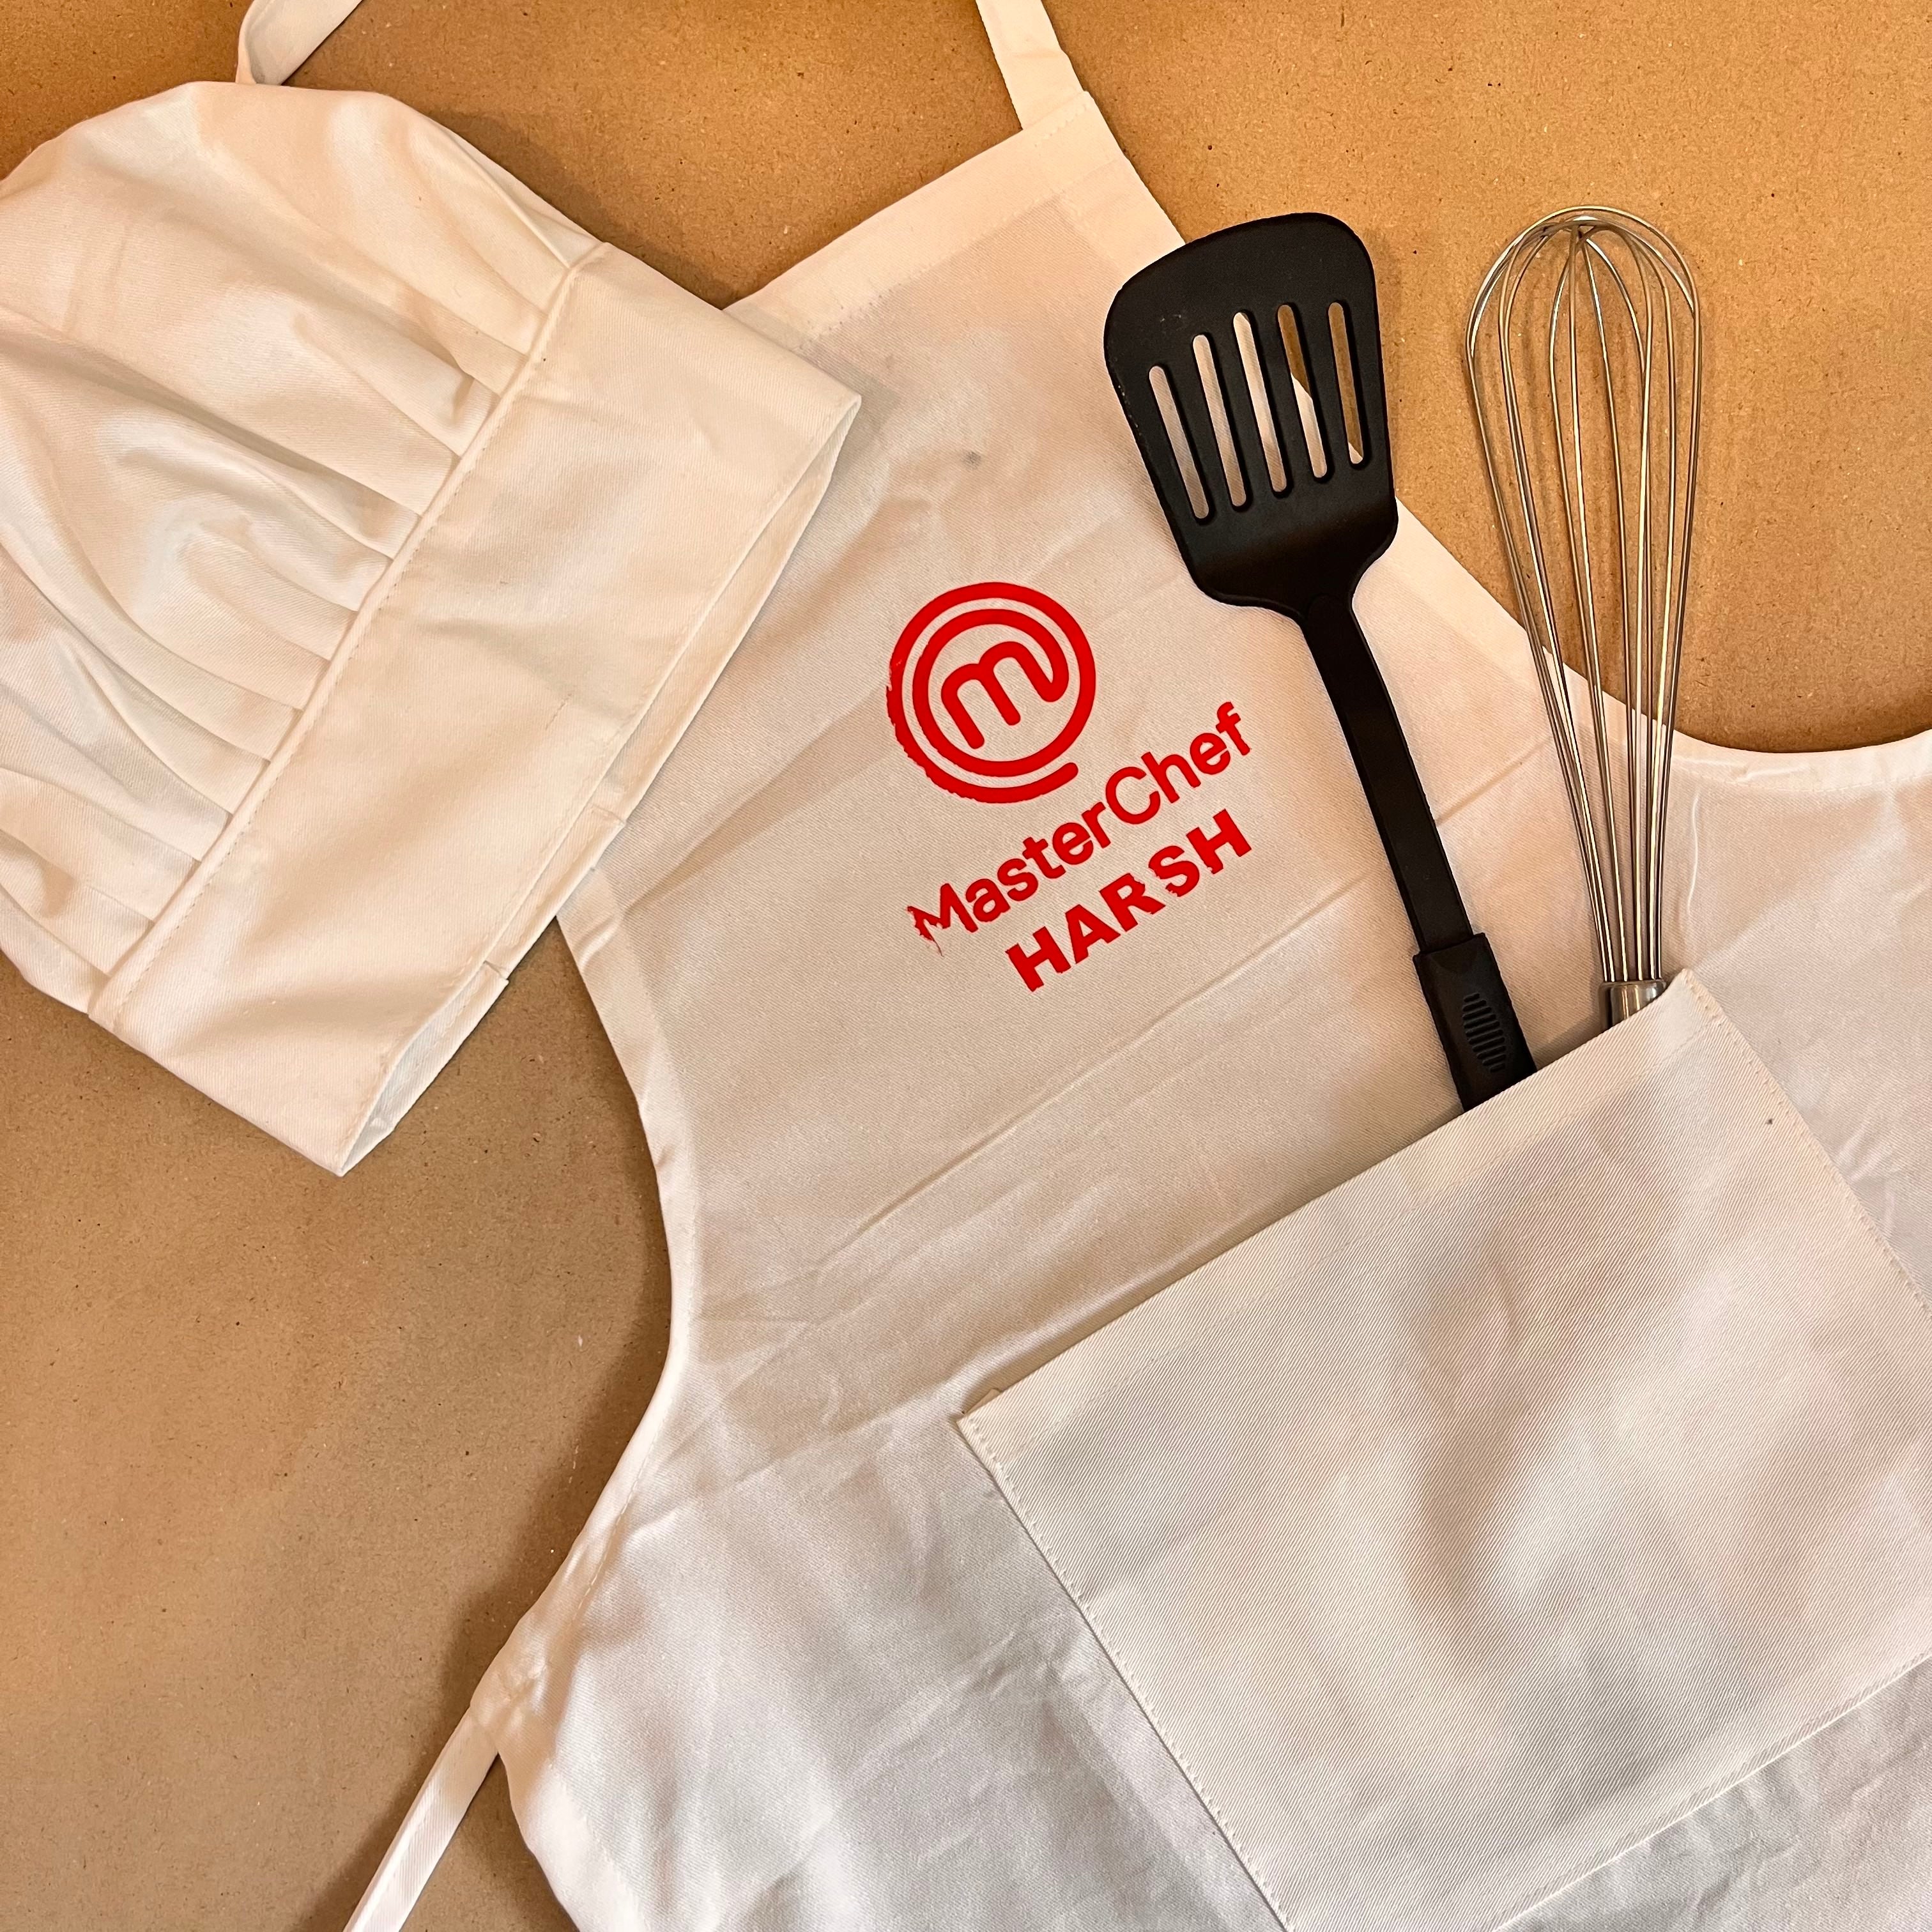 personalised apron and cap for fathers day gift